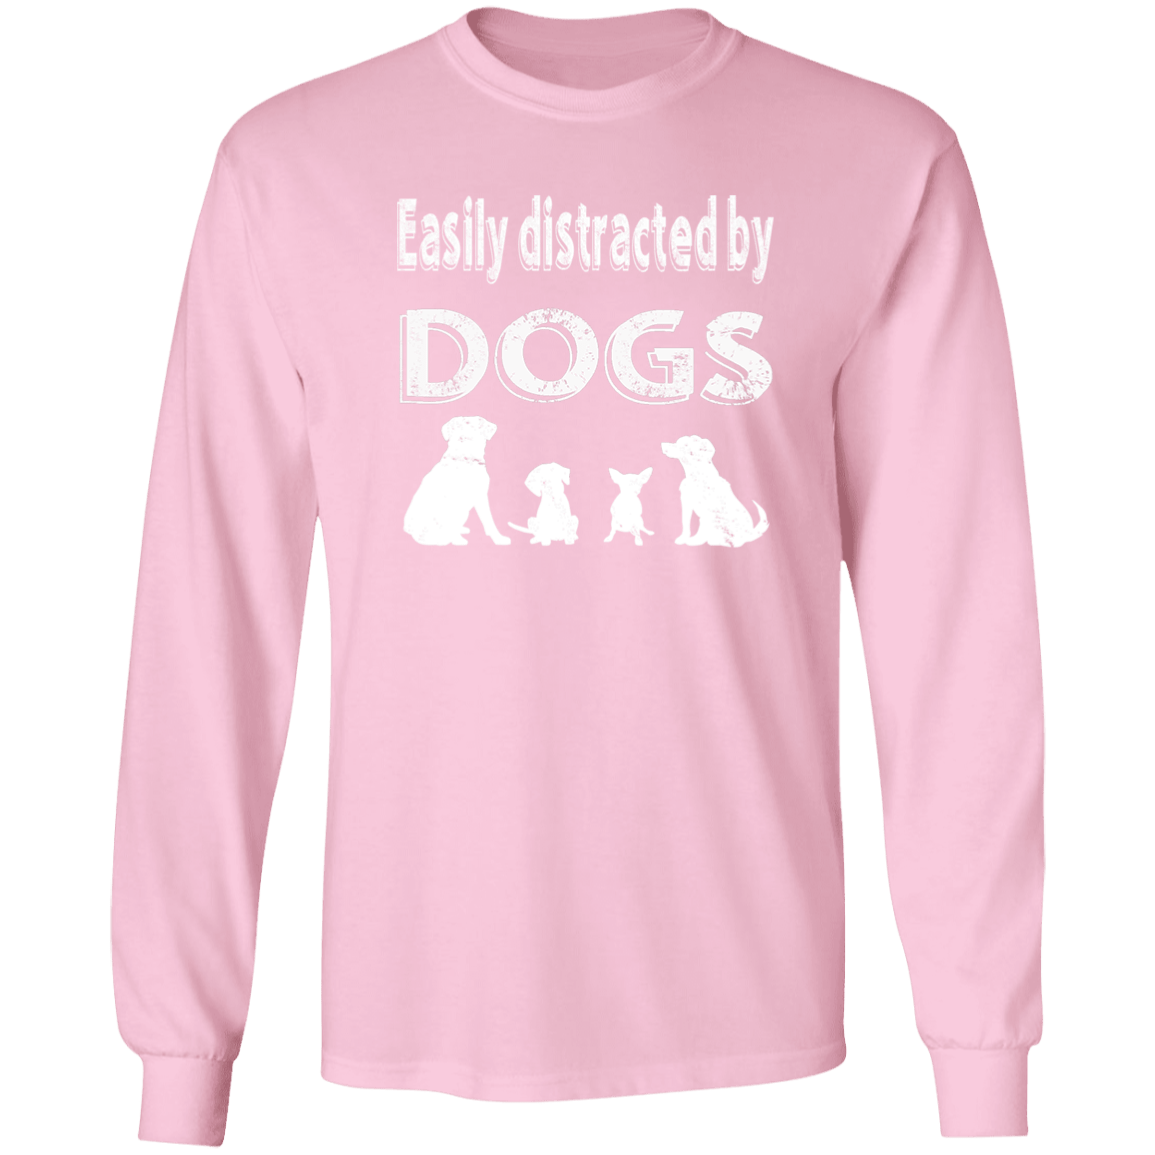 Easily Distracted By Dogs - Long Sleeve T Shirt.